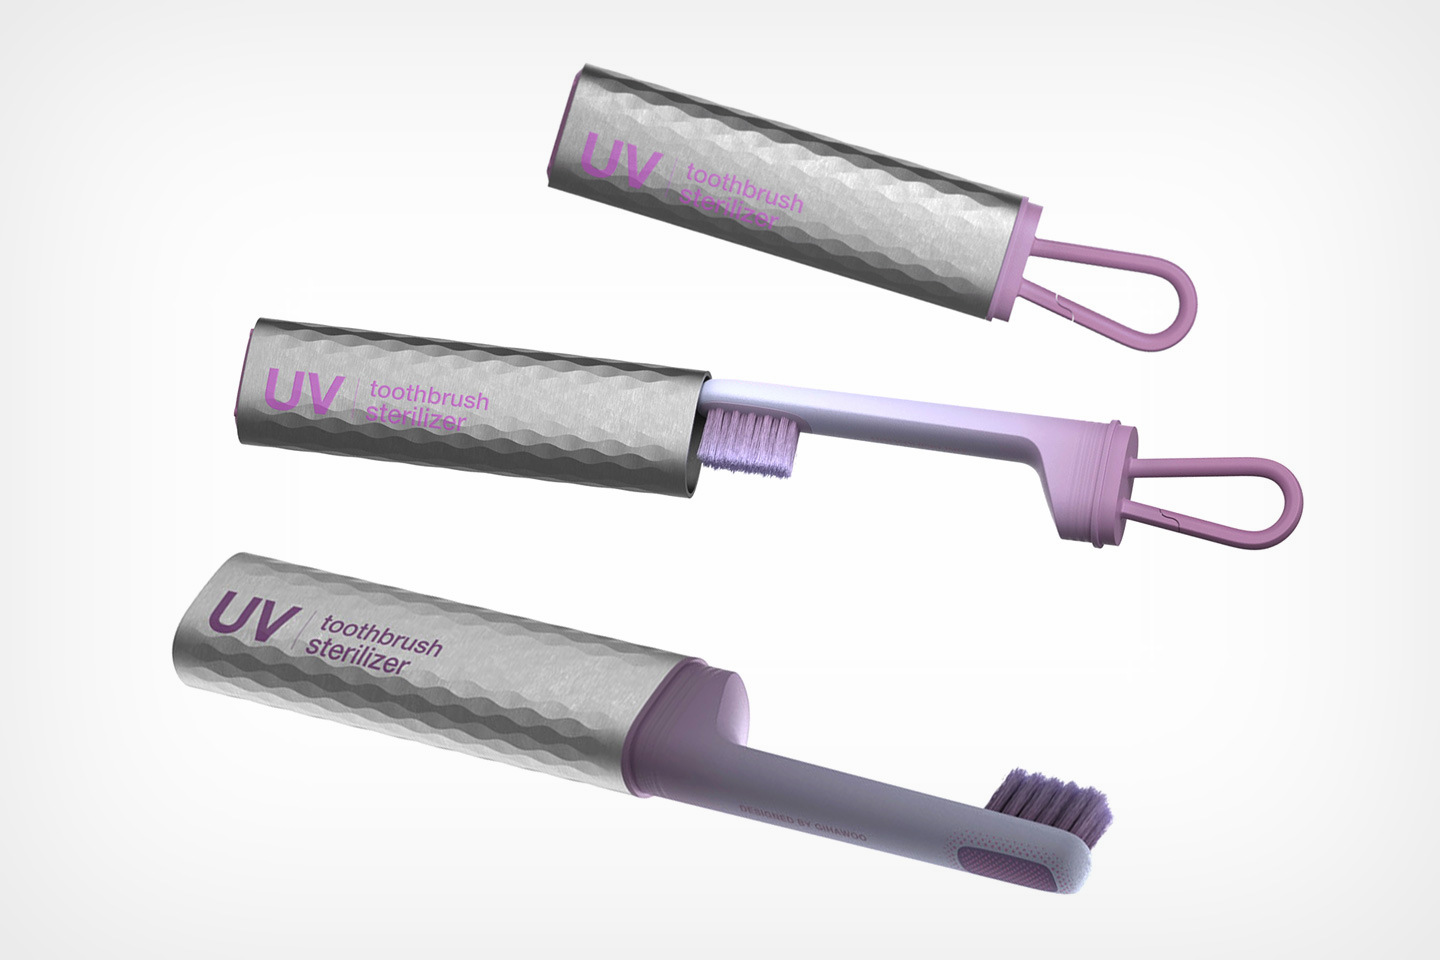 #Portable Travel Toothbrush also comes with a built-in UV sterilizer that kills all germs